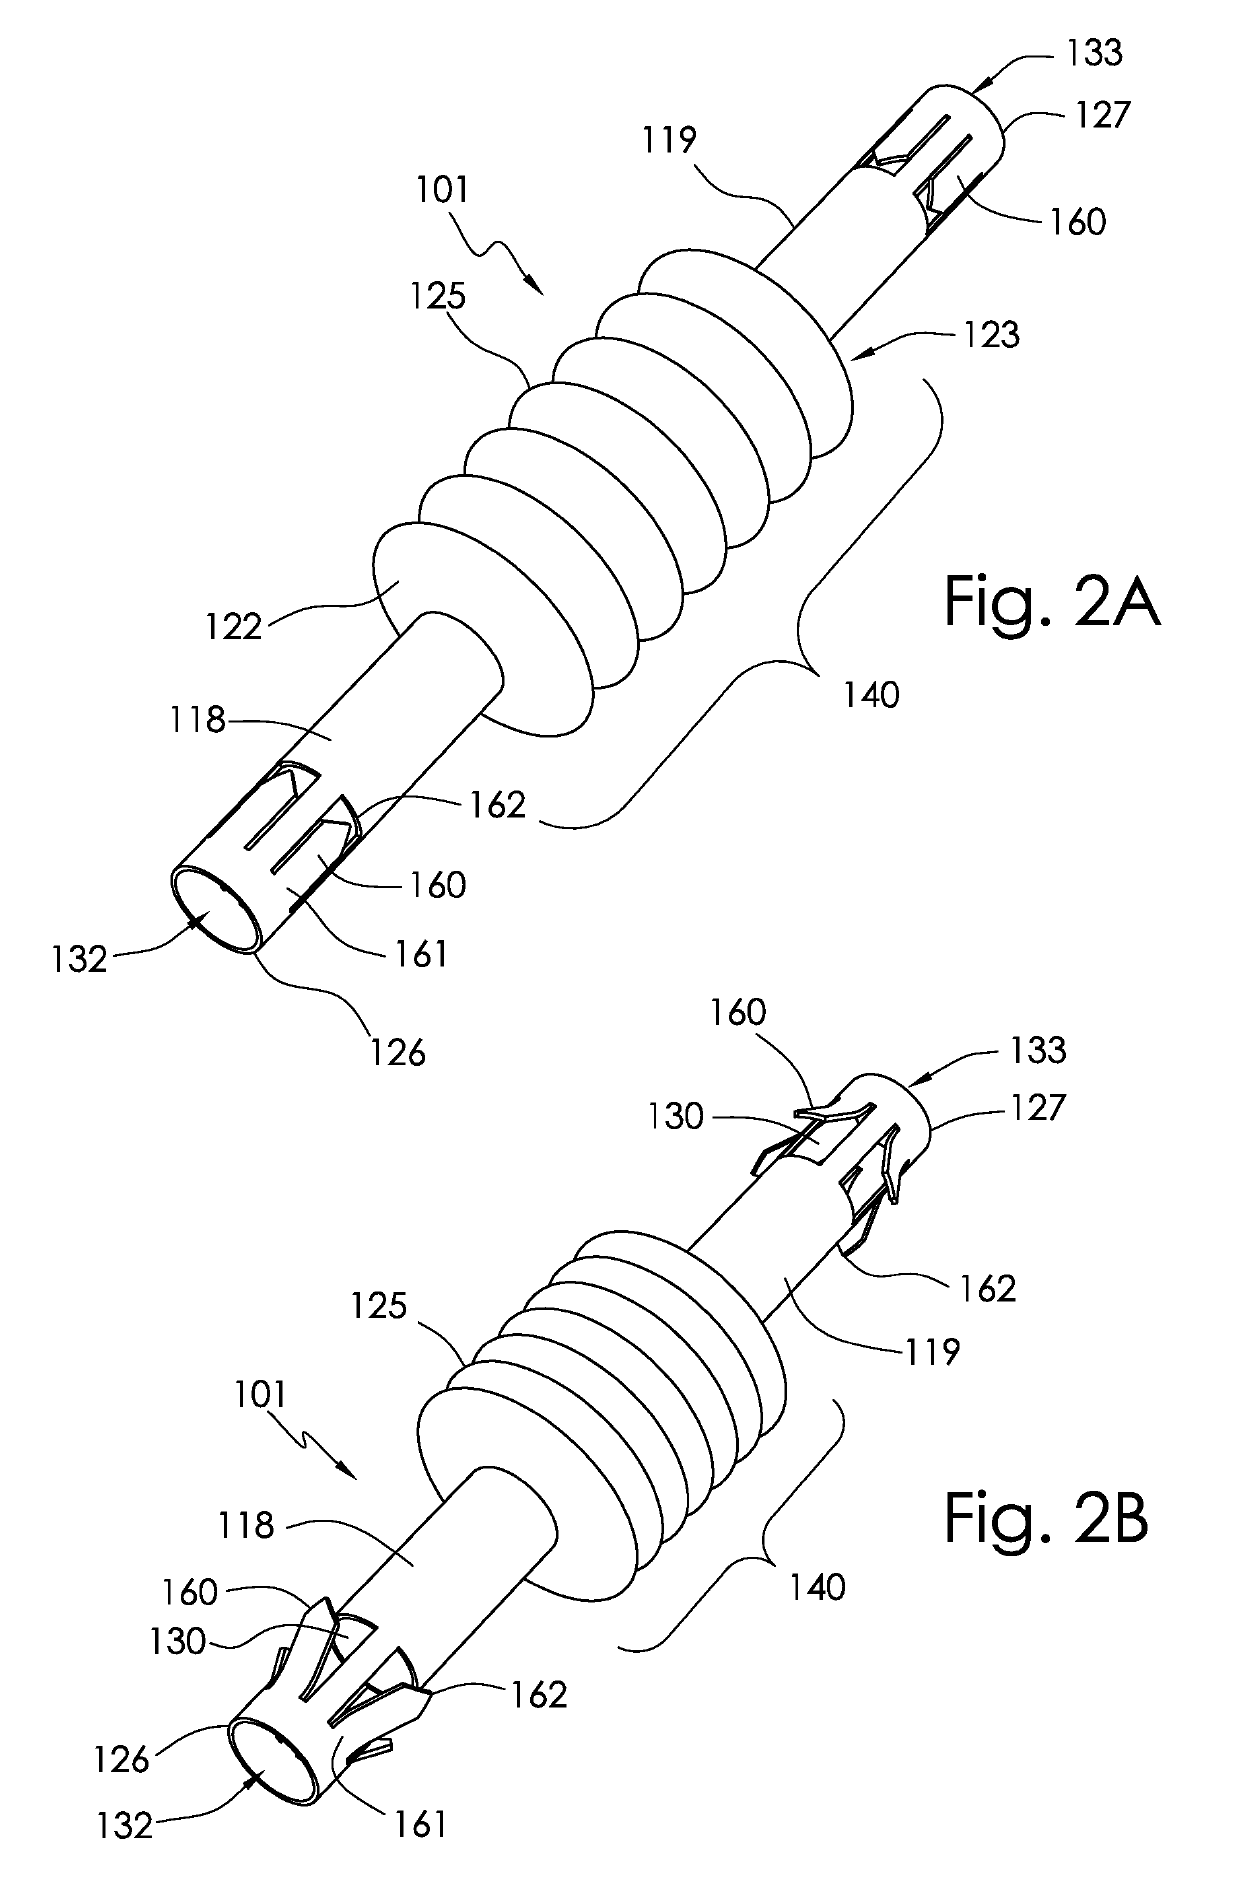 Fasteners with shape changing zigzag structures and methods using same